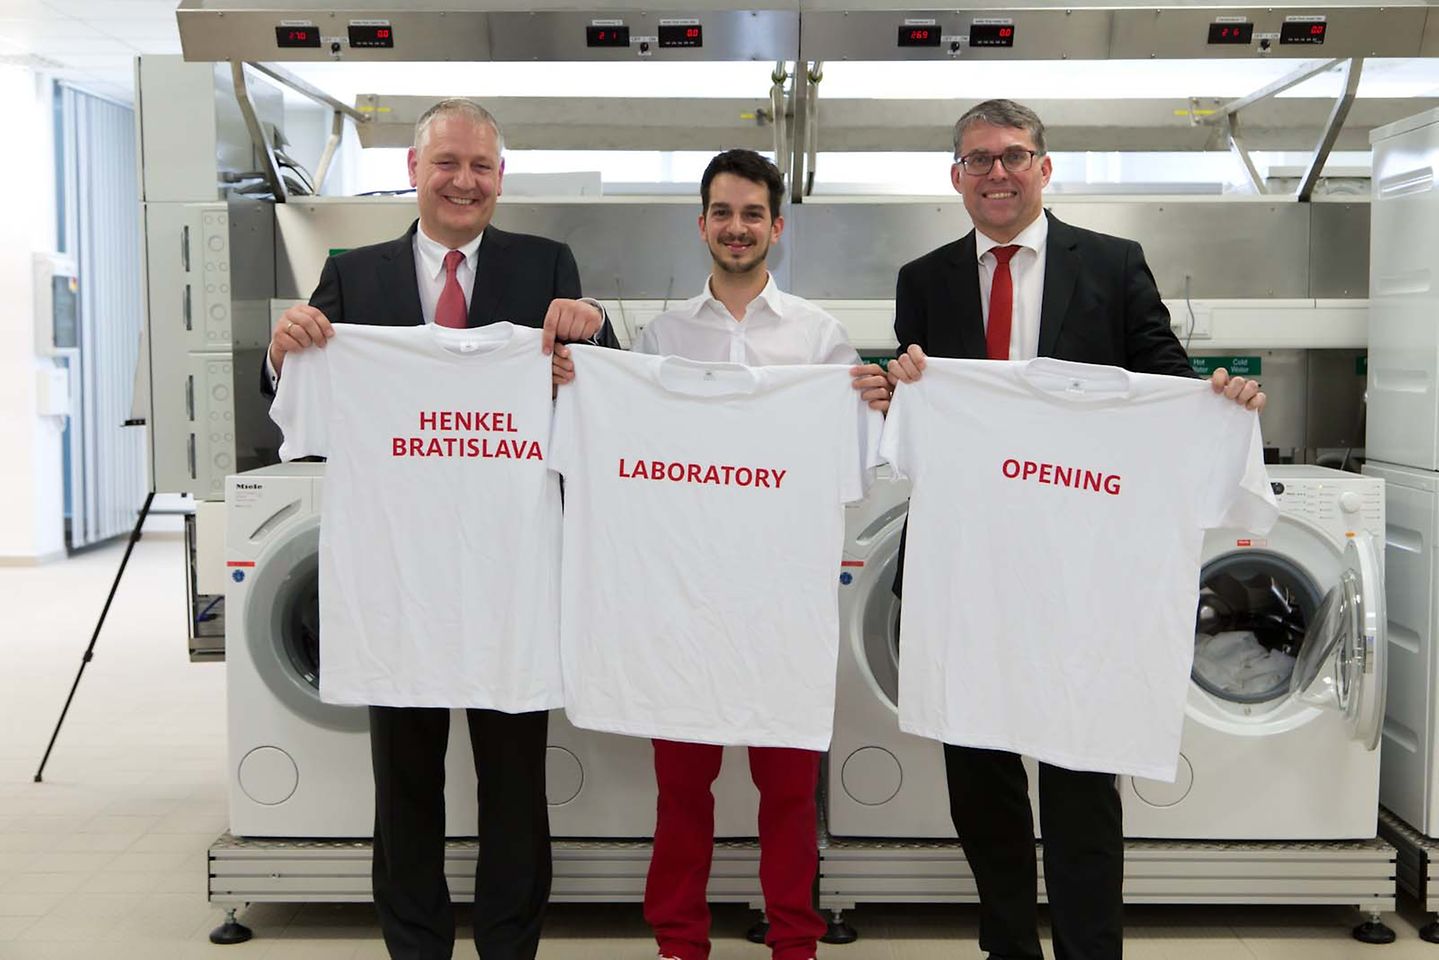 
Thomas Müller-Kirschbaum (Corporate Senior Vice President of Laundry & Home Care, R&D), Christoph Giesinger (Key Account Formula CEE Laundry Care, steering Lab Bratislava), Rudolf Steger (General Manager of Henkel Slovakia and Head of SSC Bratislava) (left to right).